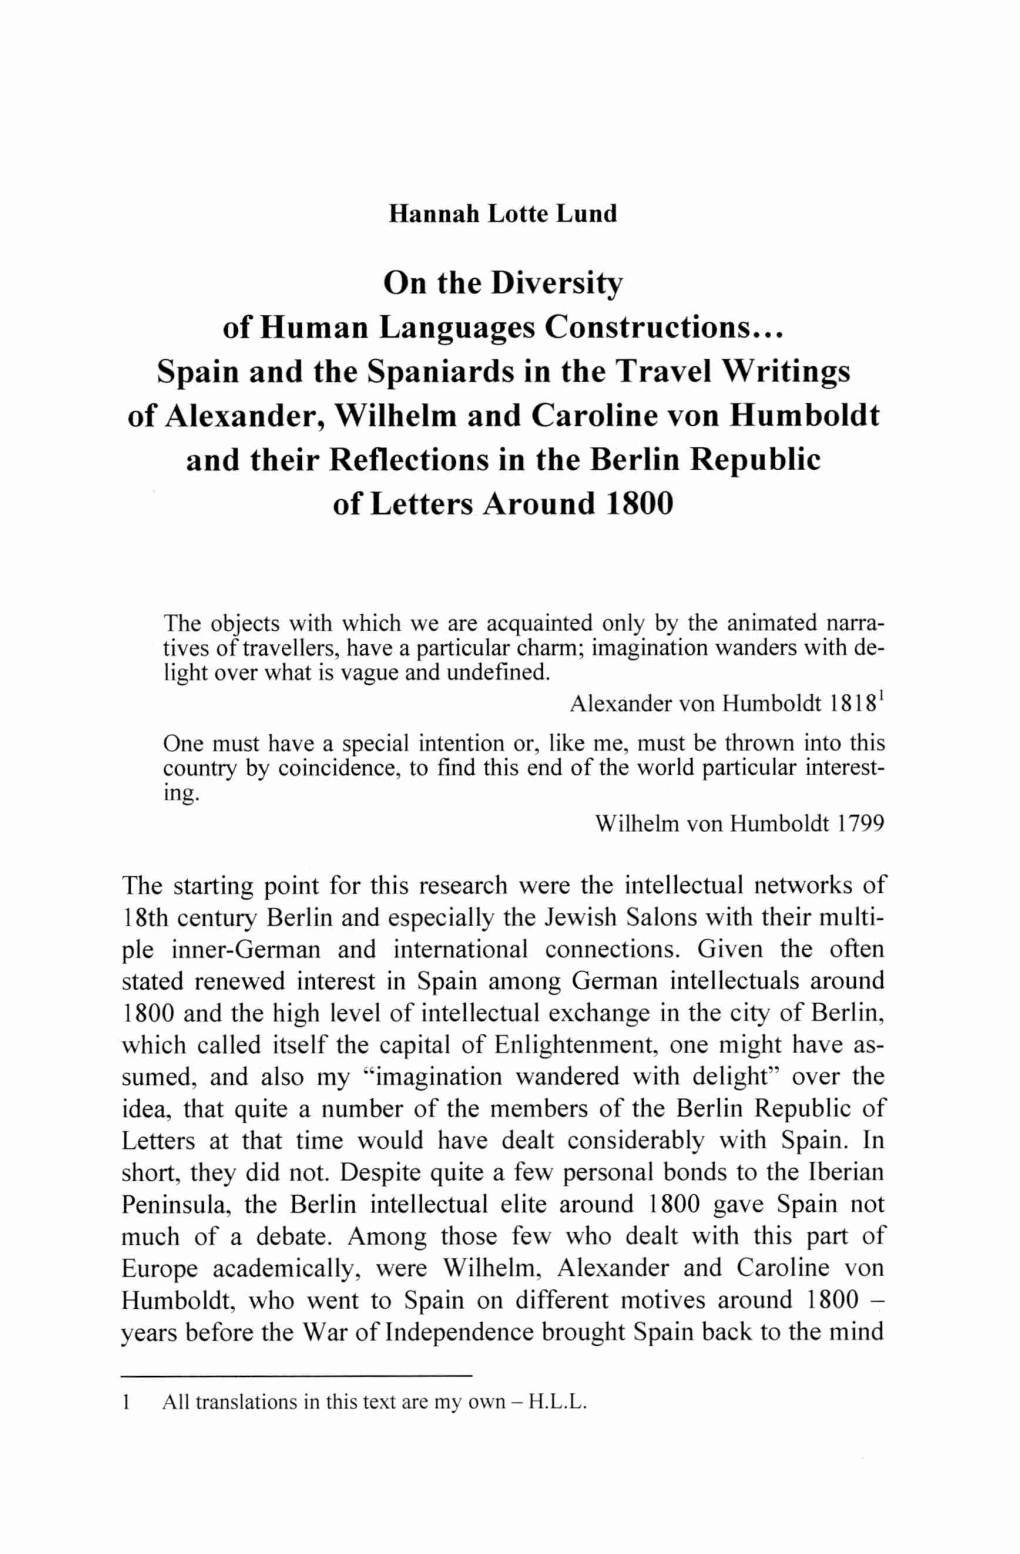 On the Diversity of Human Languages Constructions... Spain and The